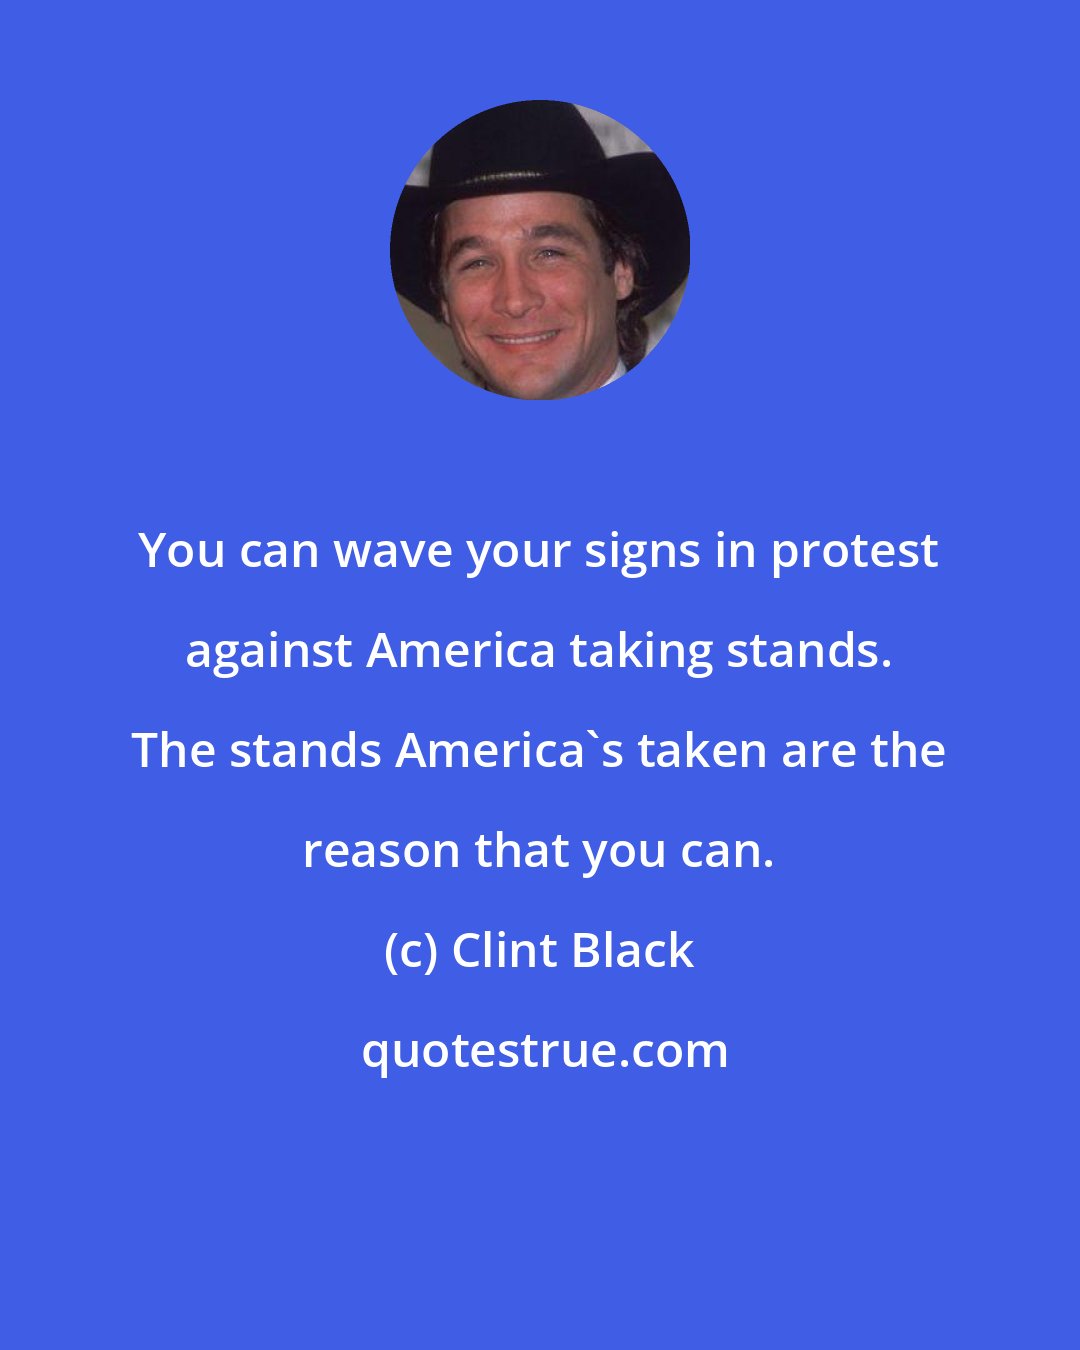 Clint Black: You can wave your signs in protest against America taking stands. The stands America's taken are the reason that you can.